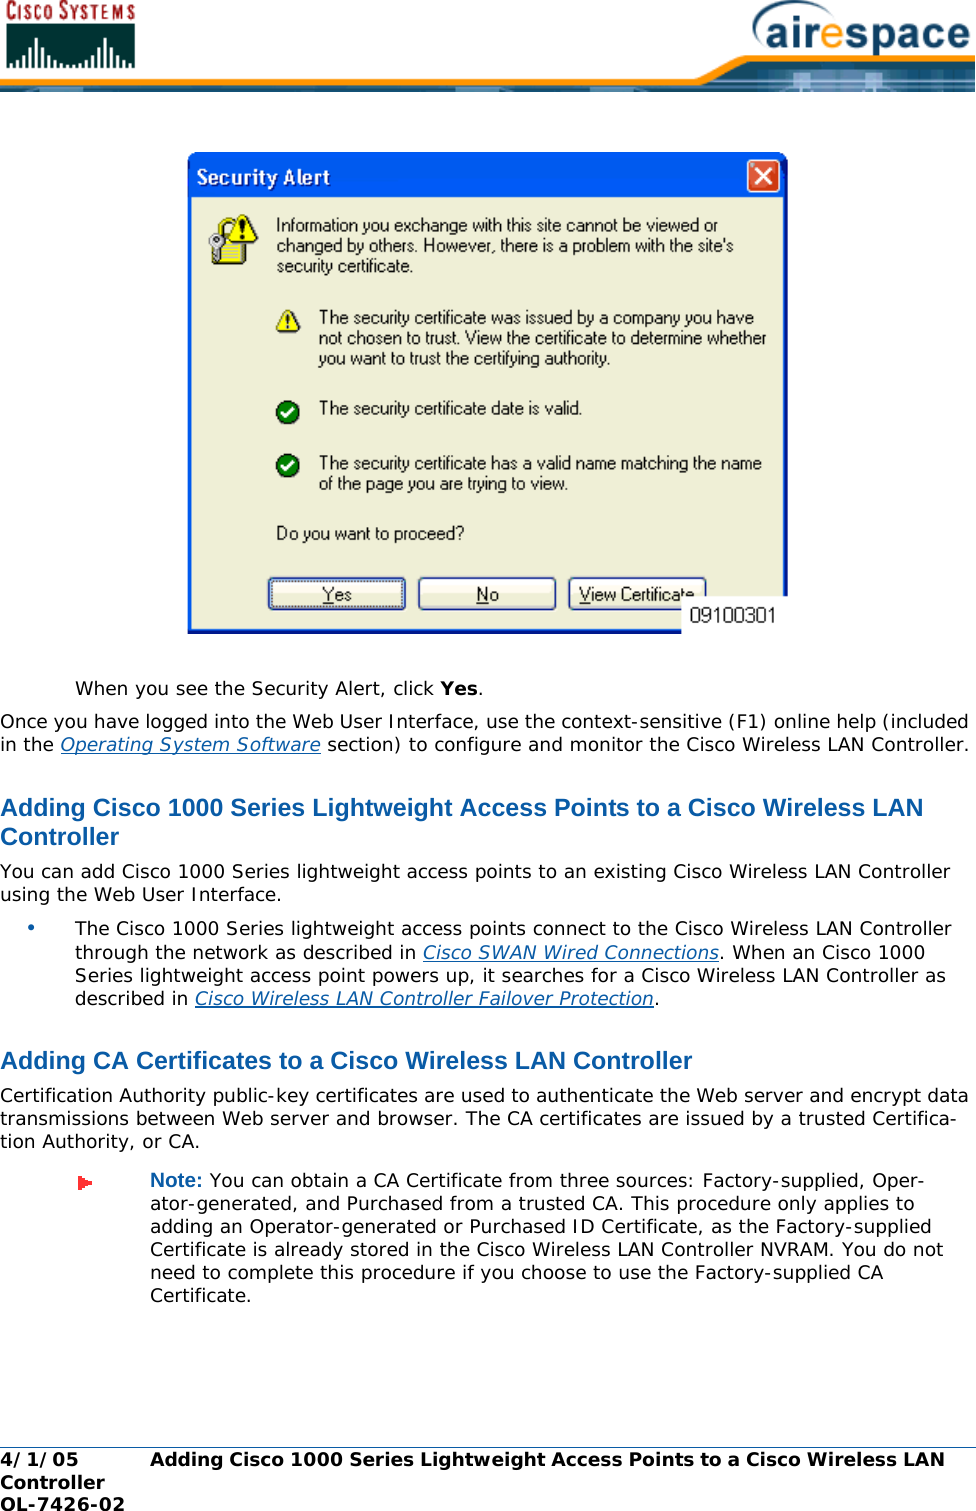 4/1/05 Adding Cisco 1000 Series Lightweight Access Points to a Cisco Wireless LAN Controller  OL-7426-02When you see the Security Alert, click Yes. Once you have logged into the Web User Interface, use the context-sensitive (F1) online help (included in the Operating System Software section) to configure and monitor the Cisco Wireless LAN Controller.Adding Cisco 1000 Series Lightweight Access Points to a Cisco Wireless LAN ControllerAdding Cisco 1000 Series Lightweight Access Points to a Cisco Wireless LAN ControllerYou can add Cisco 1000 Series lightweight access points to an existing Cisco Wireless LAN Controller using the Web User Interface. •The Cisco 1000 Series lightweight access points connect to the Cisco Wireless LAN Controller through the network as described in Cisco SWAN Wired Connections. When an Cisco 1000 Series lightweight access point powers up, it searches for a Cisco Wireless LAN Controller as described in Cisco Wireless LAN Controller Failover Protection.Adding CA Certificates to a Cisco Wireless LAN ControllerAdding CA Certificates to a Cisco Wireless LAN ControllerCertification Authority public-key certificates are used to authenticate the Web server and encrypt data transmissions between Web server and browser. The CA certificates are issued by a trusted Certifica-tion Authority, or CA. Note: You can obtain a CA Certificate from three sources: Factory-supplied, Oper-ator-generated, and Purchased from a trusted CA. This procedure only applies to adding an Operator-generated or Purchased ID Certificate, as the Factory-supplied Certificate is already stored in the Cisco Wireless LAN Controller NVRAM. You do not need to complete this procedure if you choose to use the Factory-supplied CA Certificate.